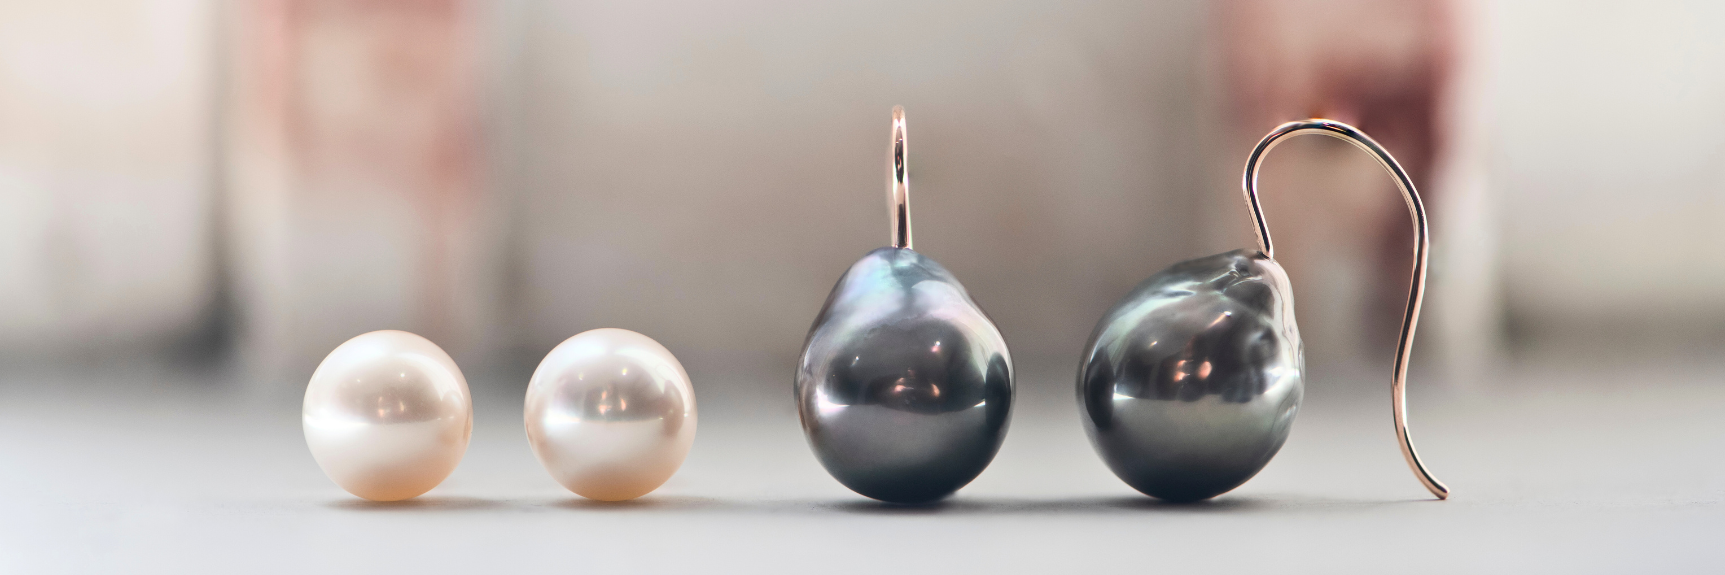 A pair of round white South Sea pearl stud earrings in 18K rose gold and a pair of Tahitian pearl baroque shepherd hook earrings in 18K rose gold are displayed on the edge of a windowsill.